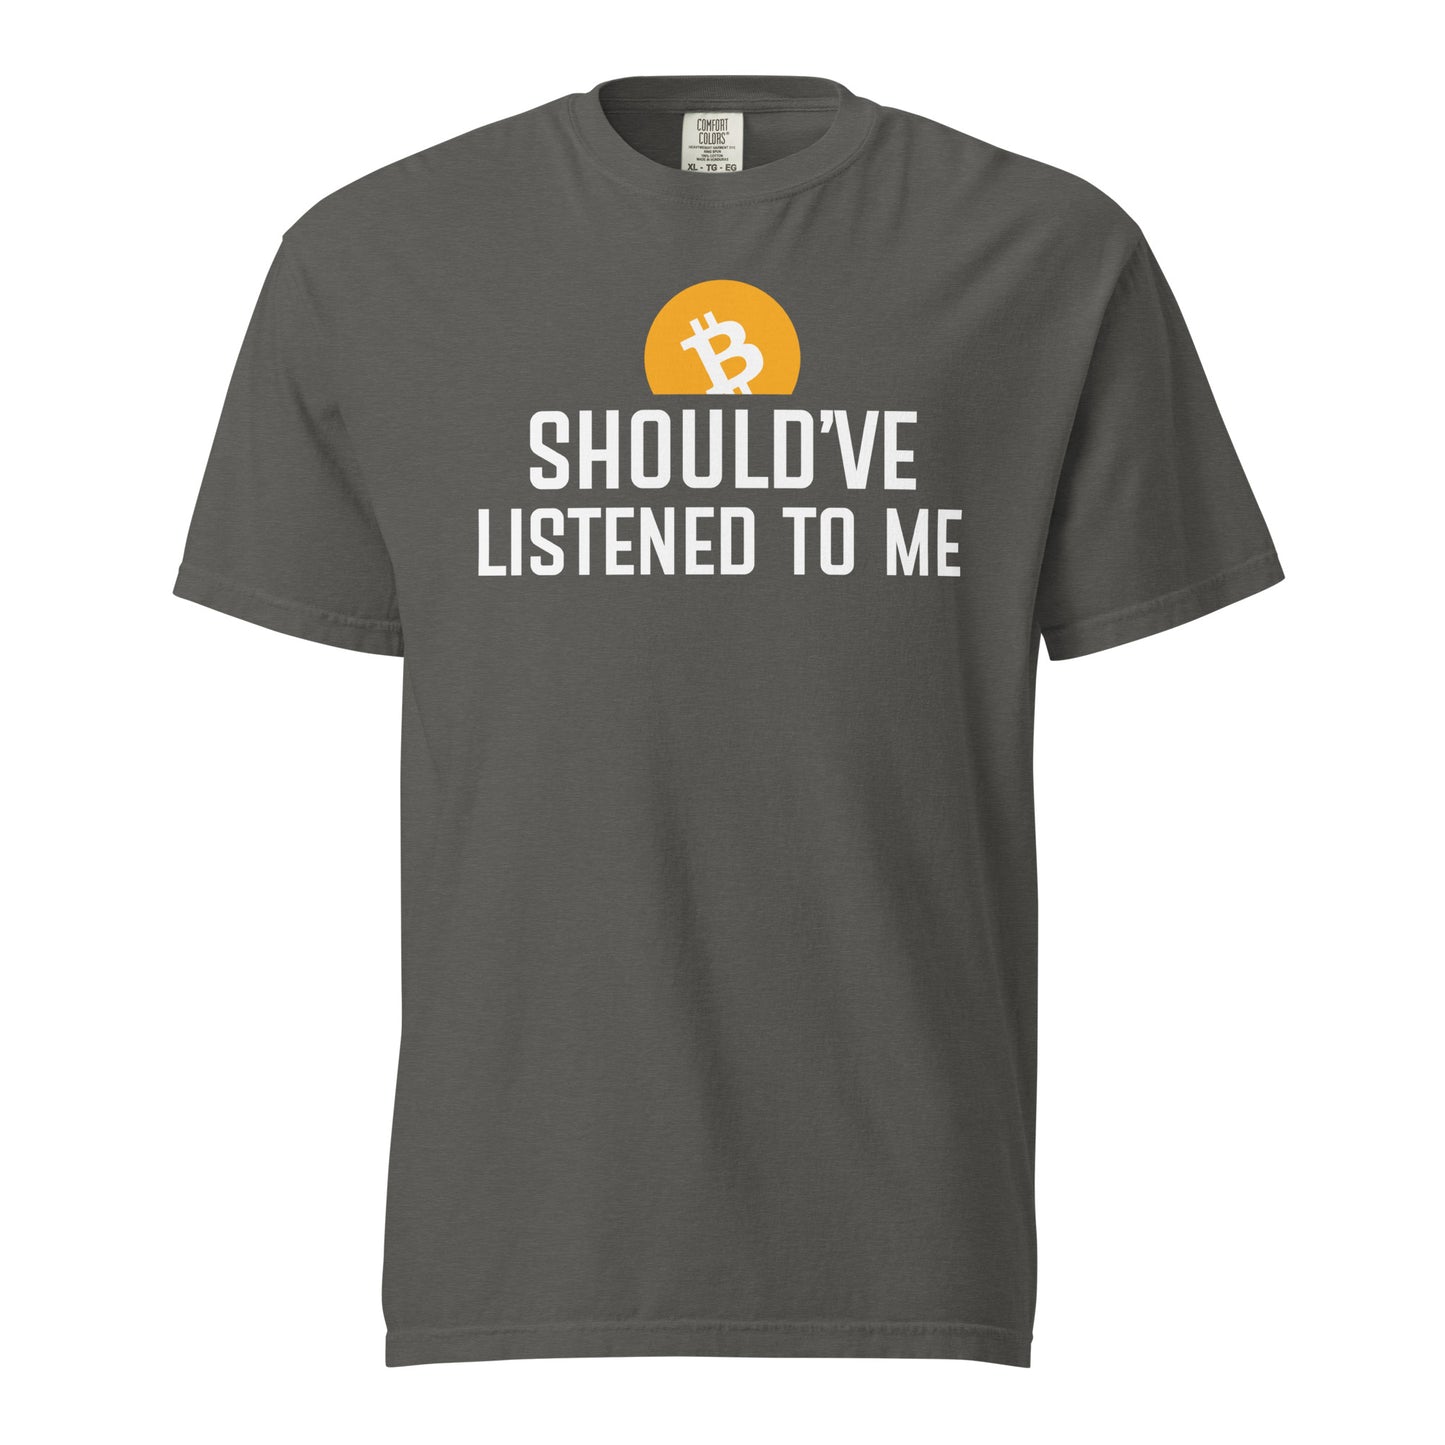 Should've listened to me heavyweight t-shirt